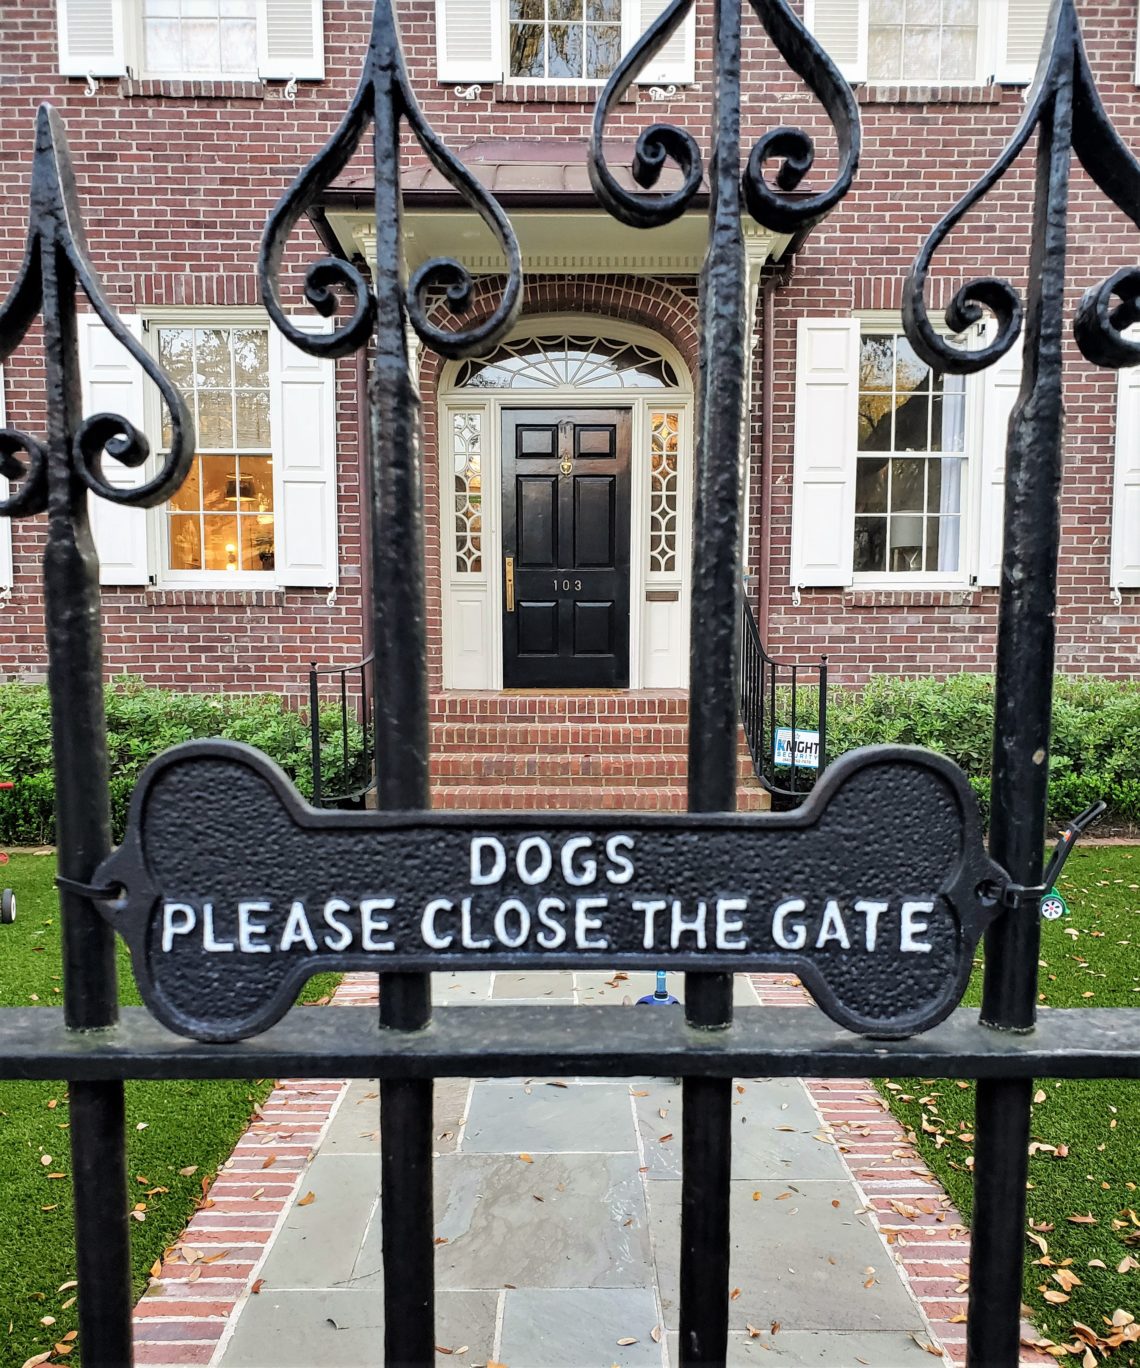 The dogs that live here are clearly well-mannered and can read!! Their house on South Battery was built on land reclaimed from the Ashley River and marshes, as part of the project that defined the Charleston peninsula as it exists today.